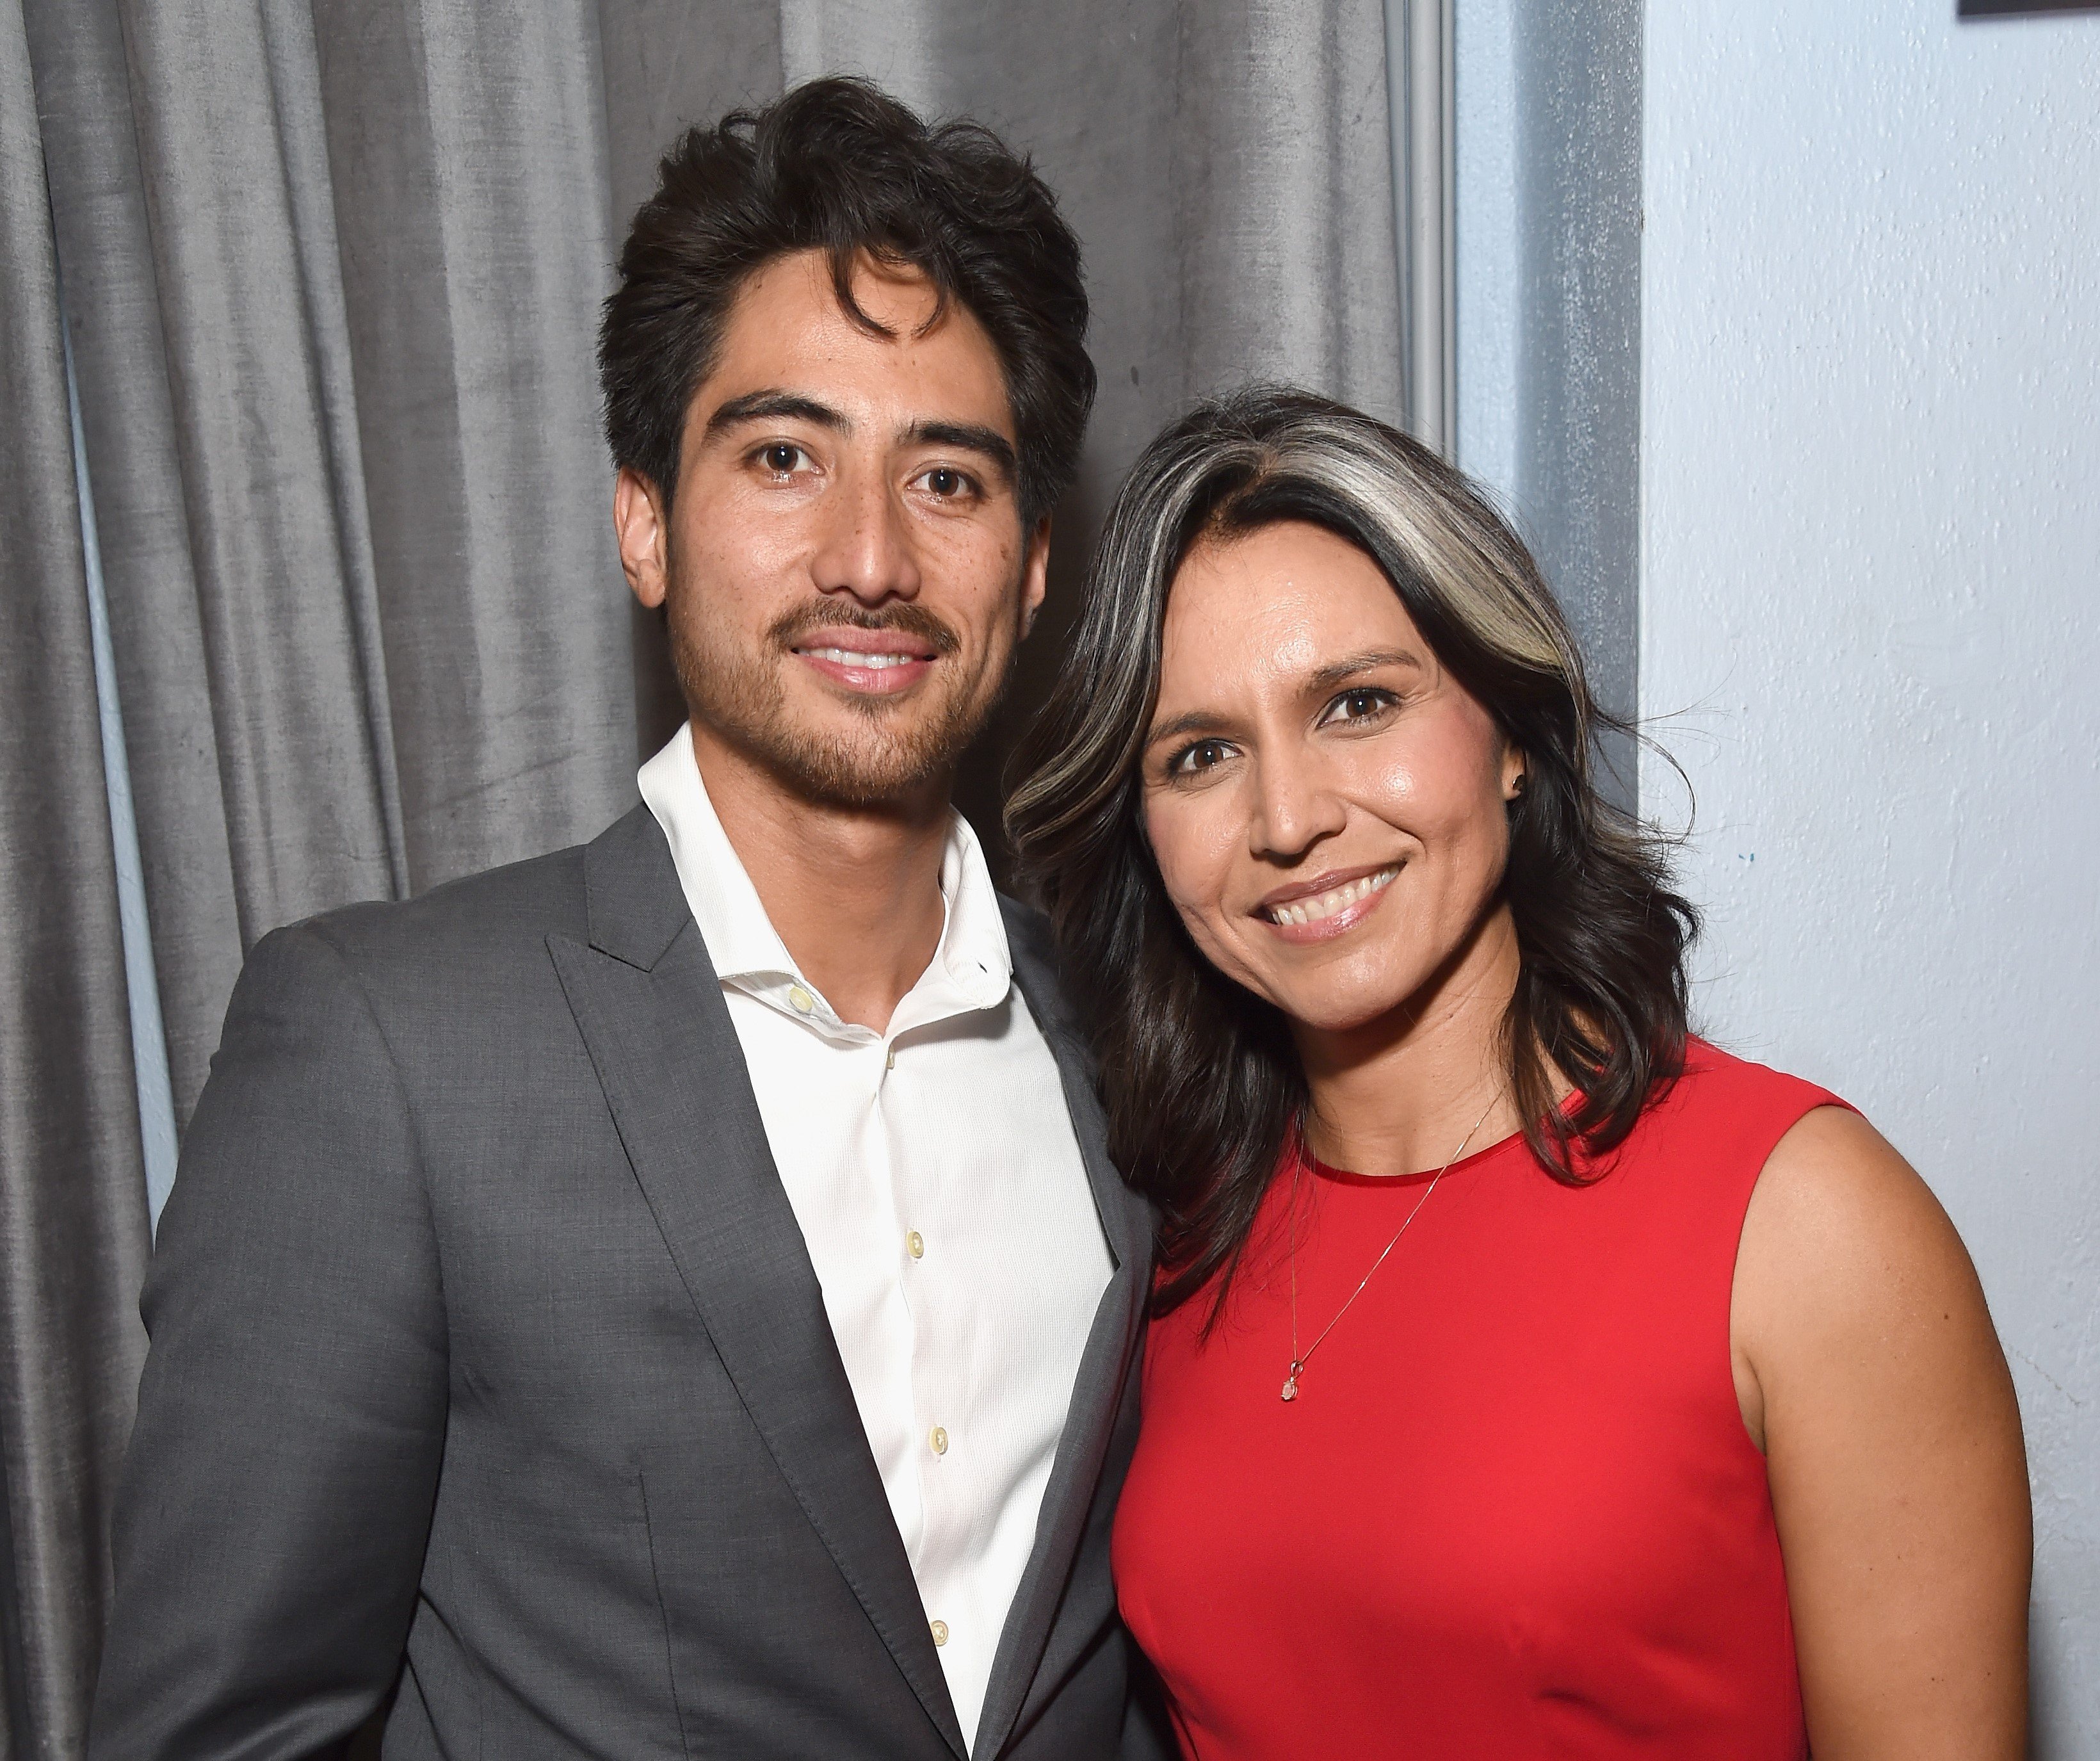 Tulsi Gabbard's Husband Is Abraham Williams Facts about Him